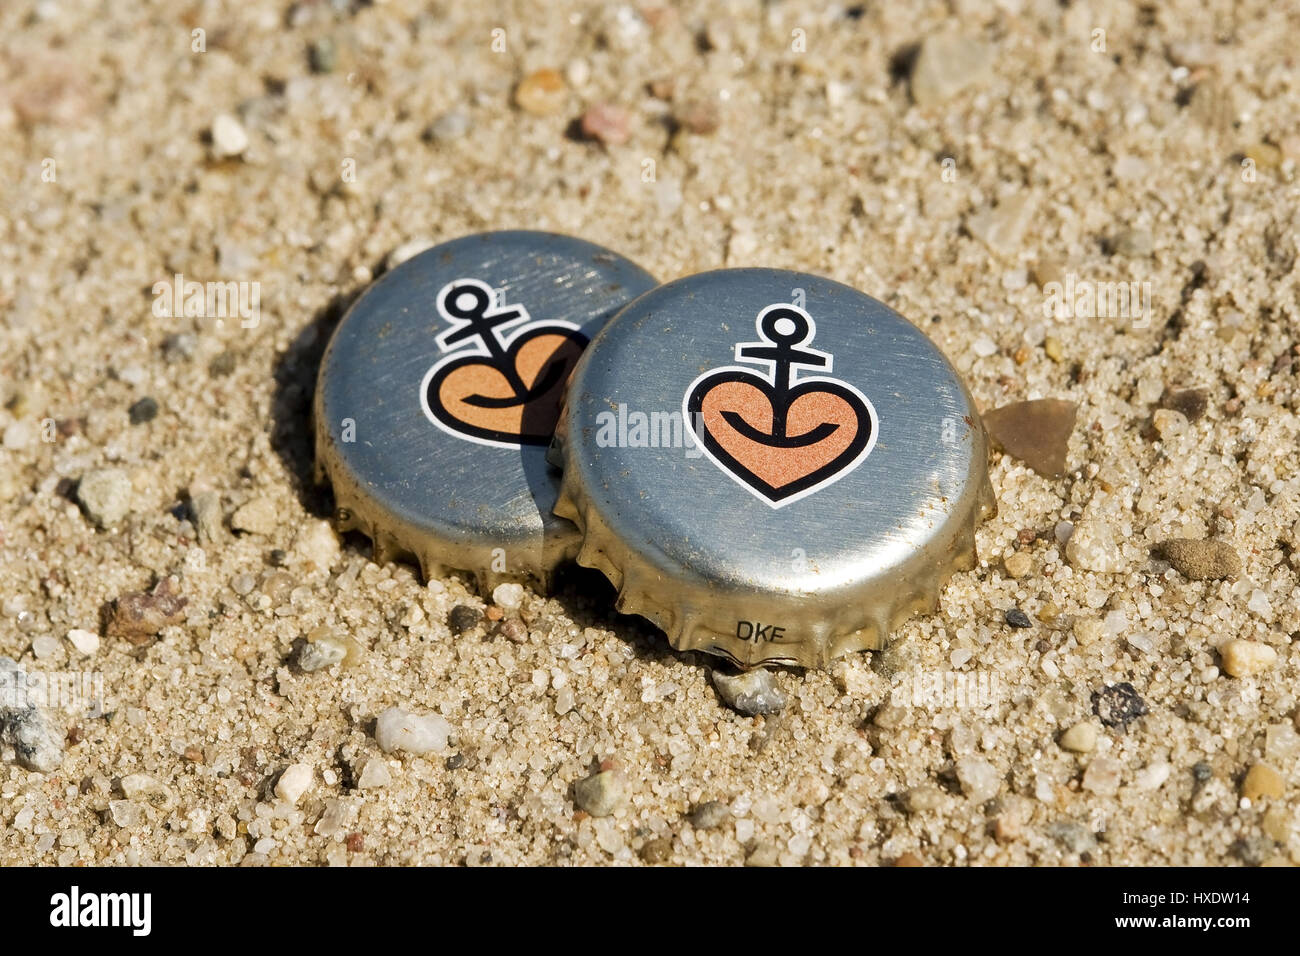 Two Astra-Kronkorken on the beach, Two Astra crown corks on the beach |, Zwei Astra-Kronkorken am Strand |Two Astra crown corks on the beach| Stock Photo